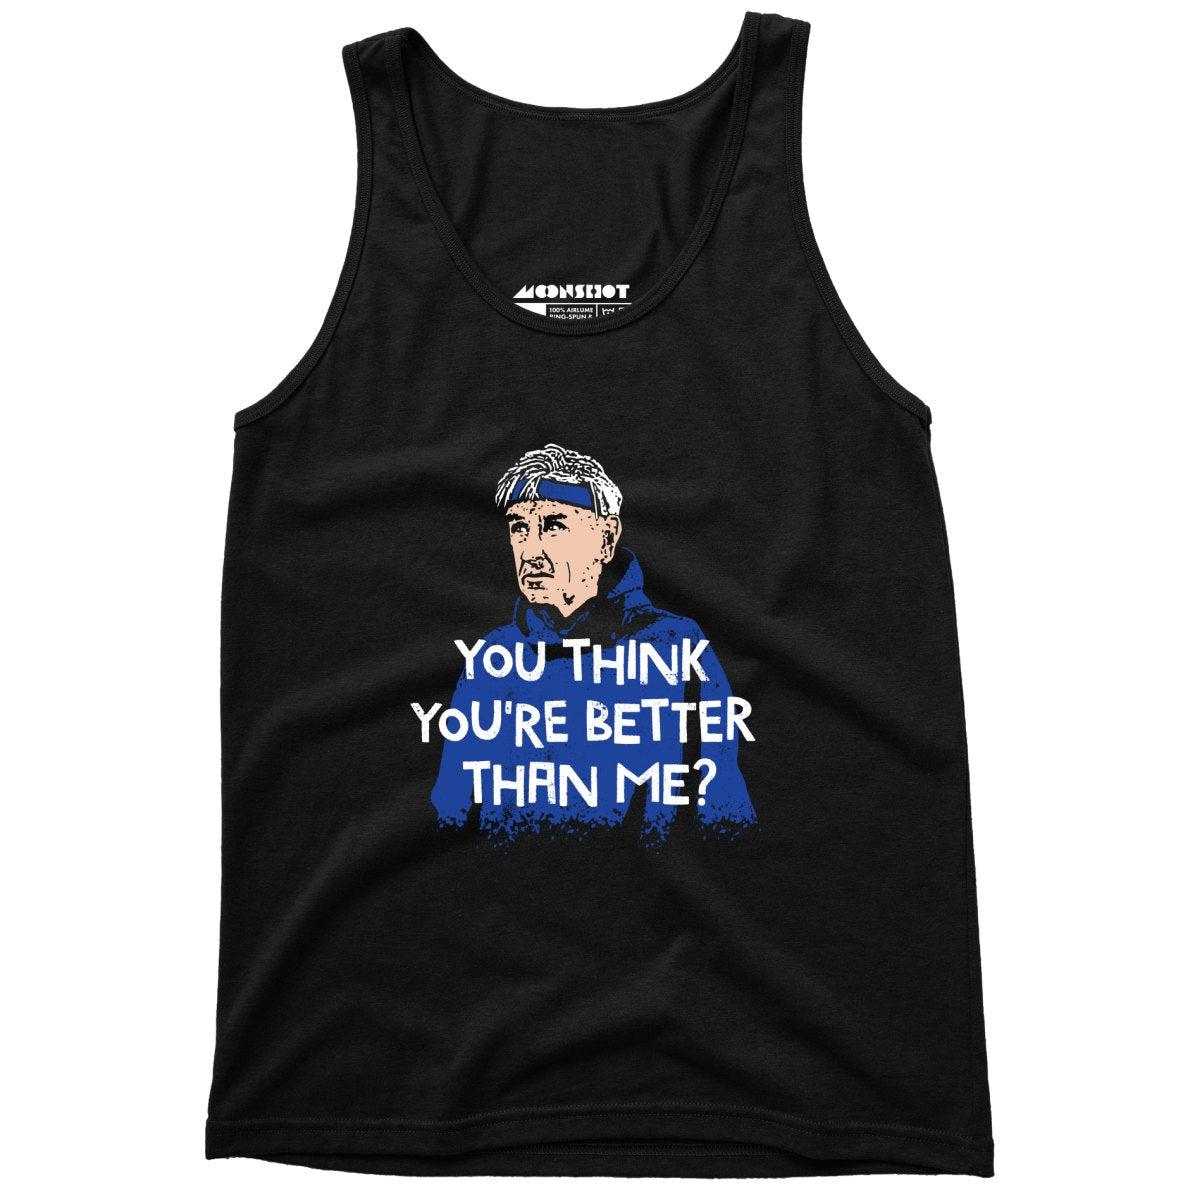 Izzy Mandelbaum - You Think You're Better Than Me? - Unisex Tank Top